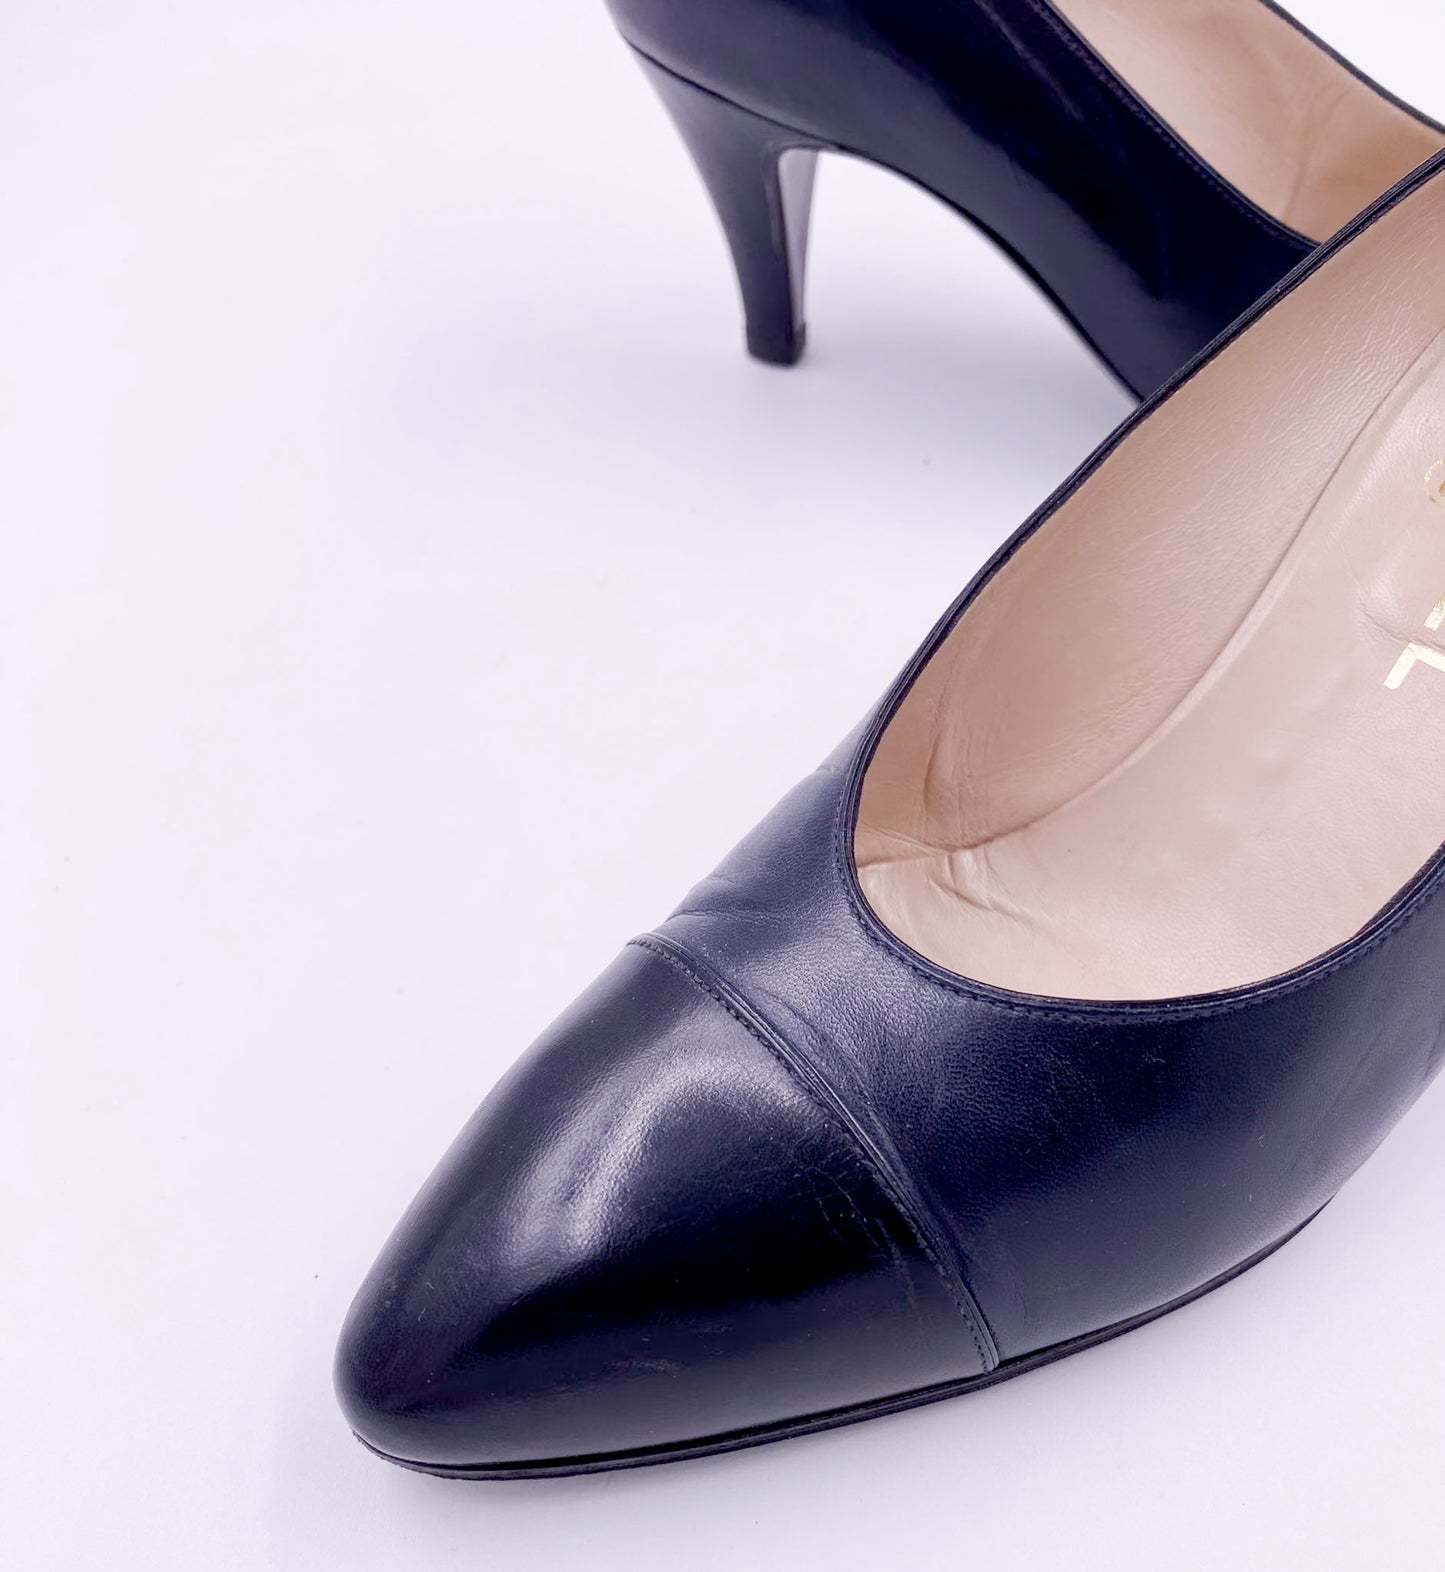 Chanel Pumps Black with Black Leather Toe